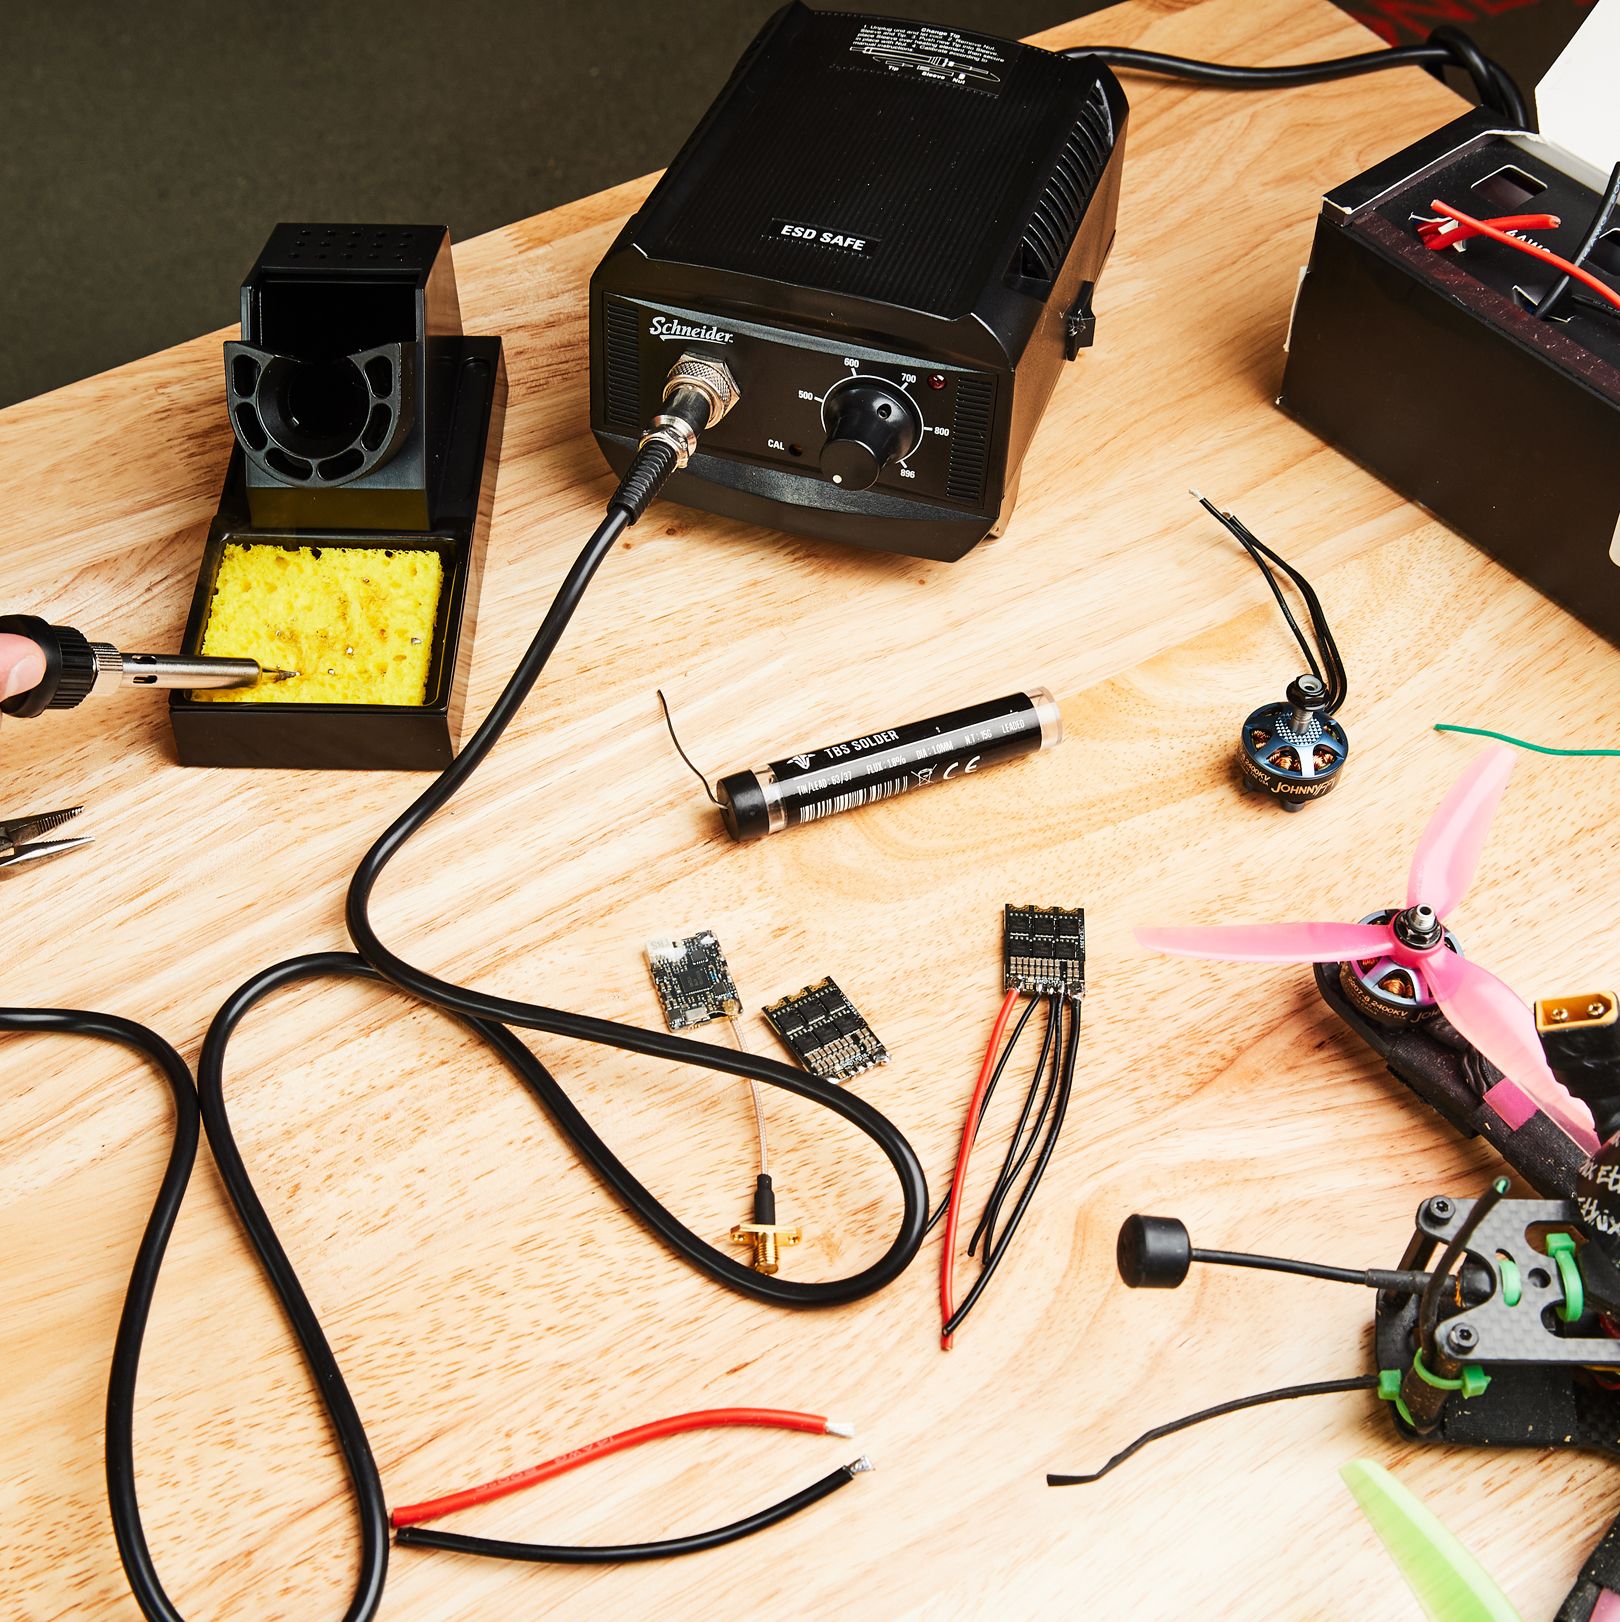 How To Get Started In Soldering